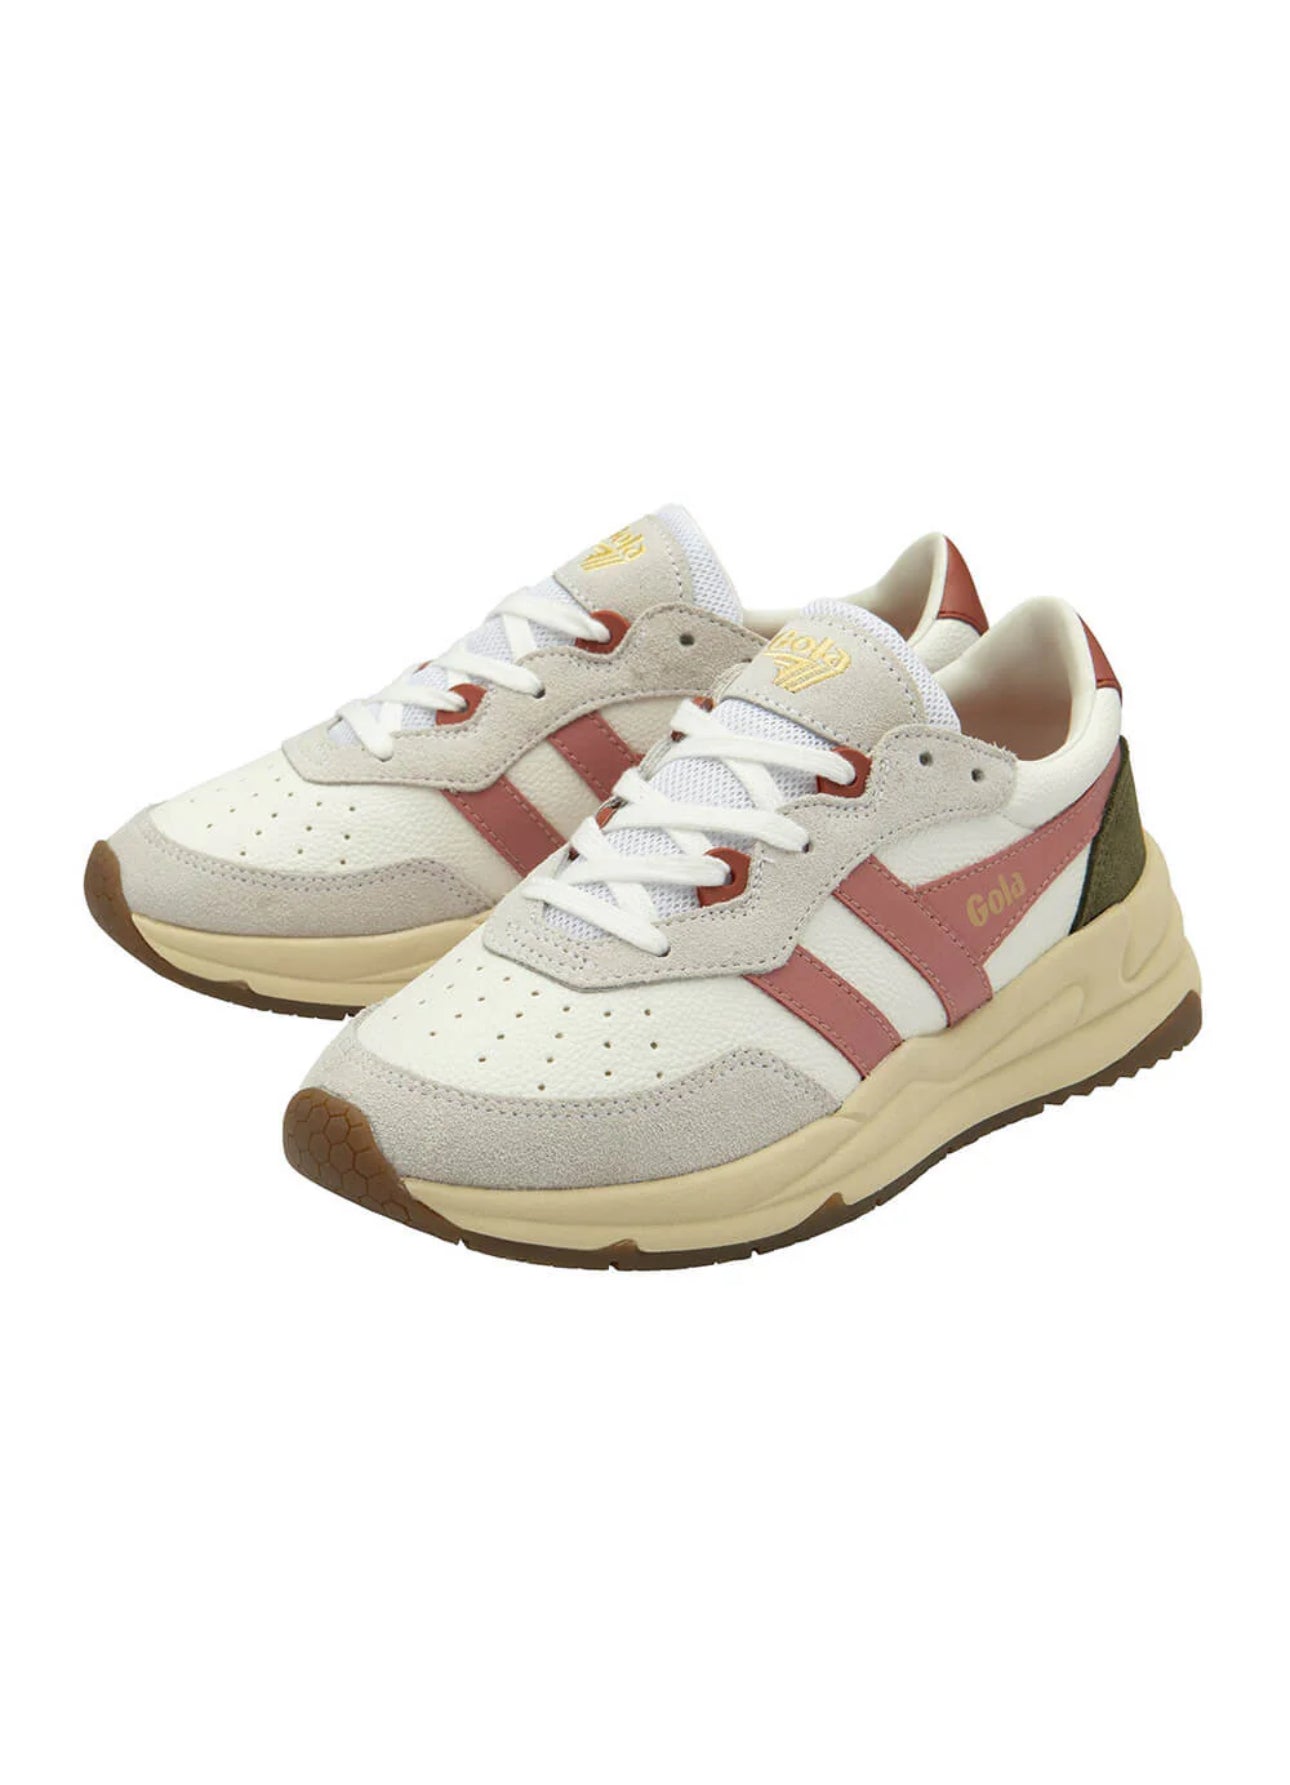 Gola Classics Saturn Sneakers for Women in White/Coral Pink/Khaki Sneakers